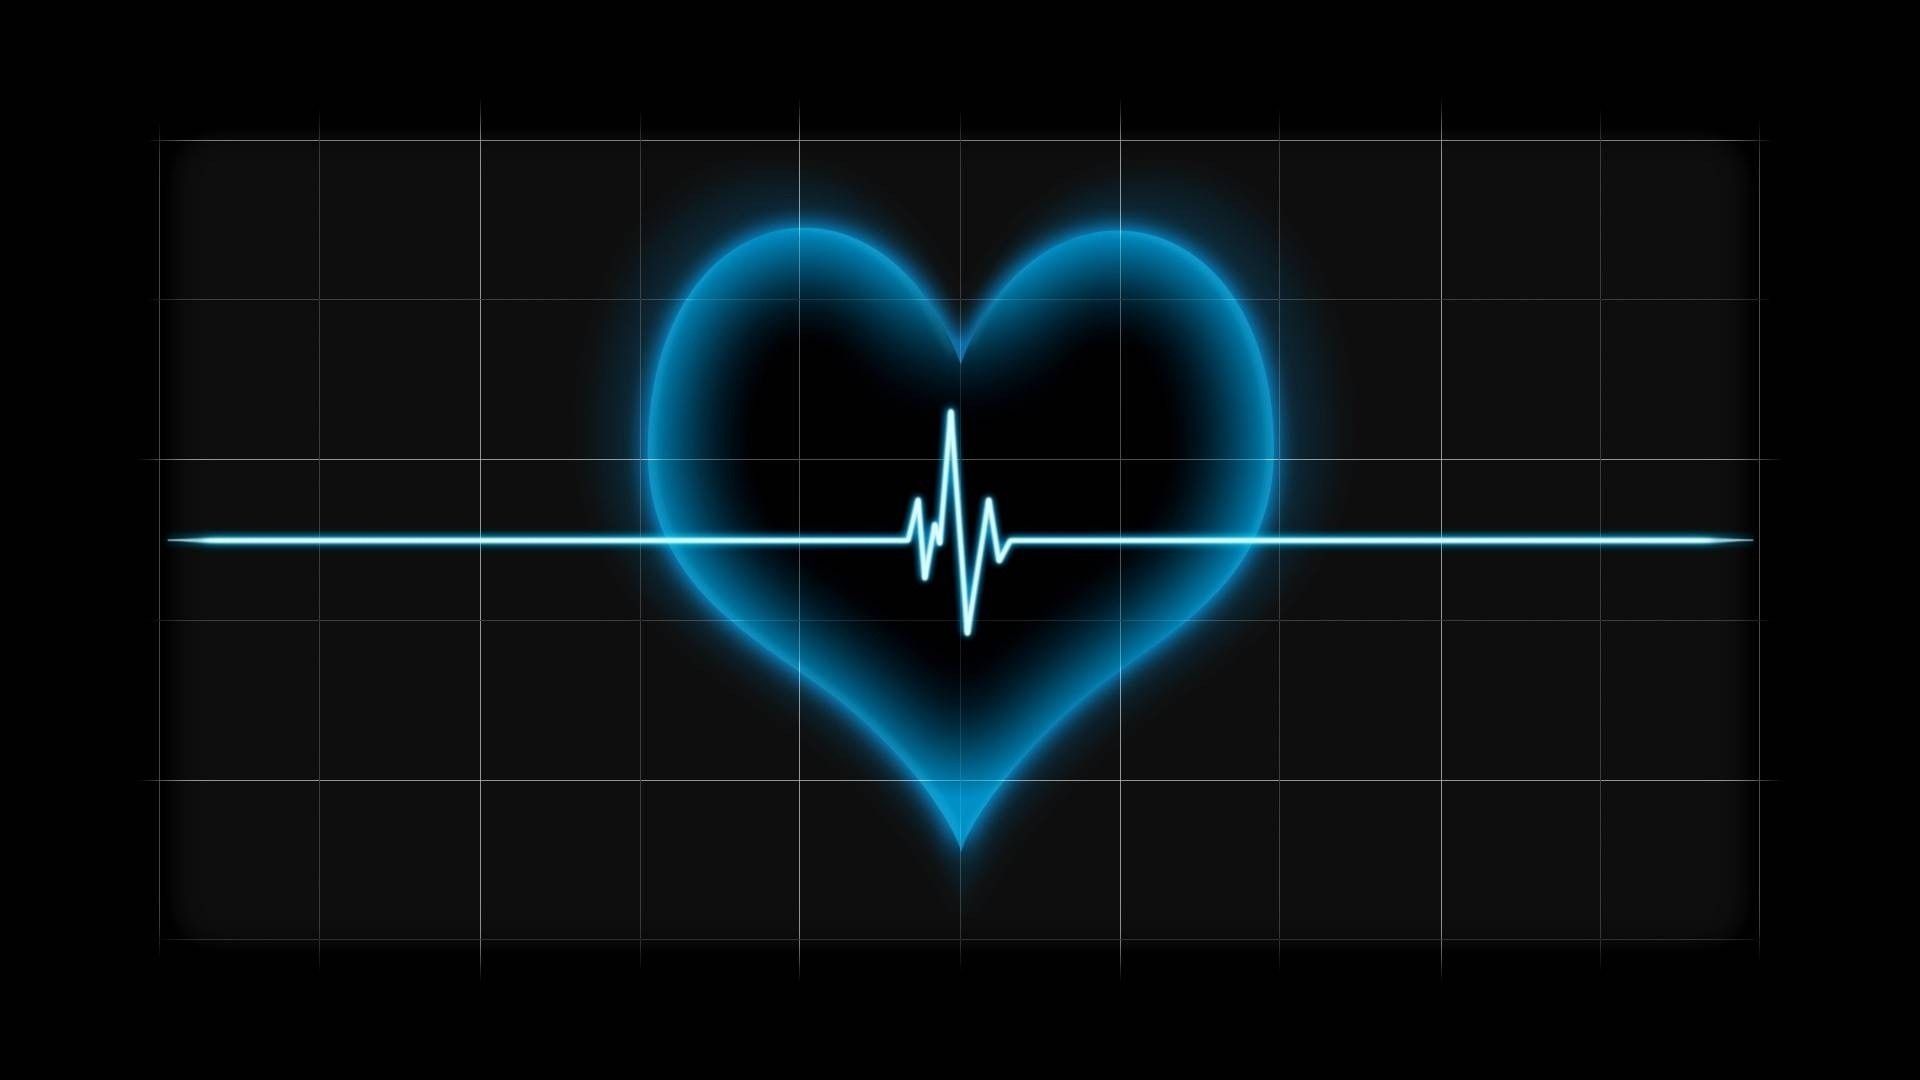 Blue Hearts Background